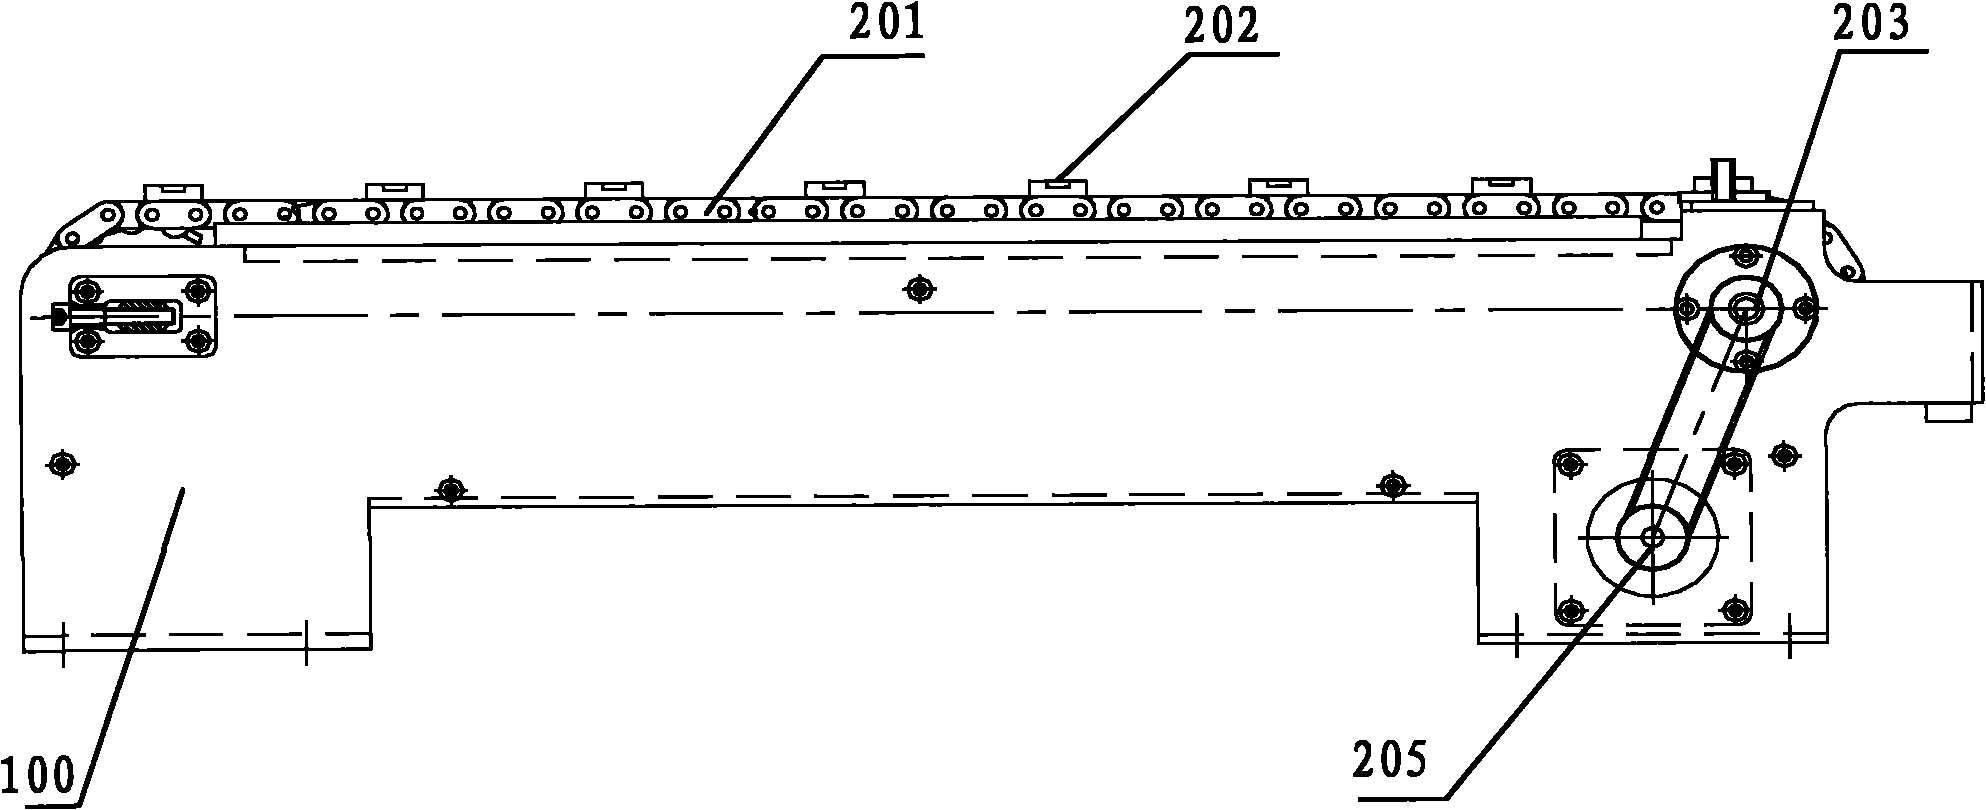 Automatic sample conveying device